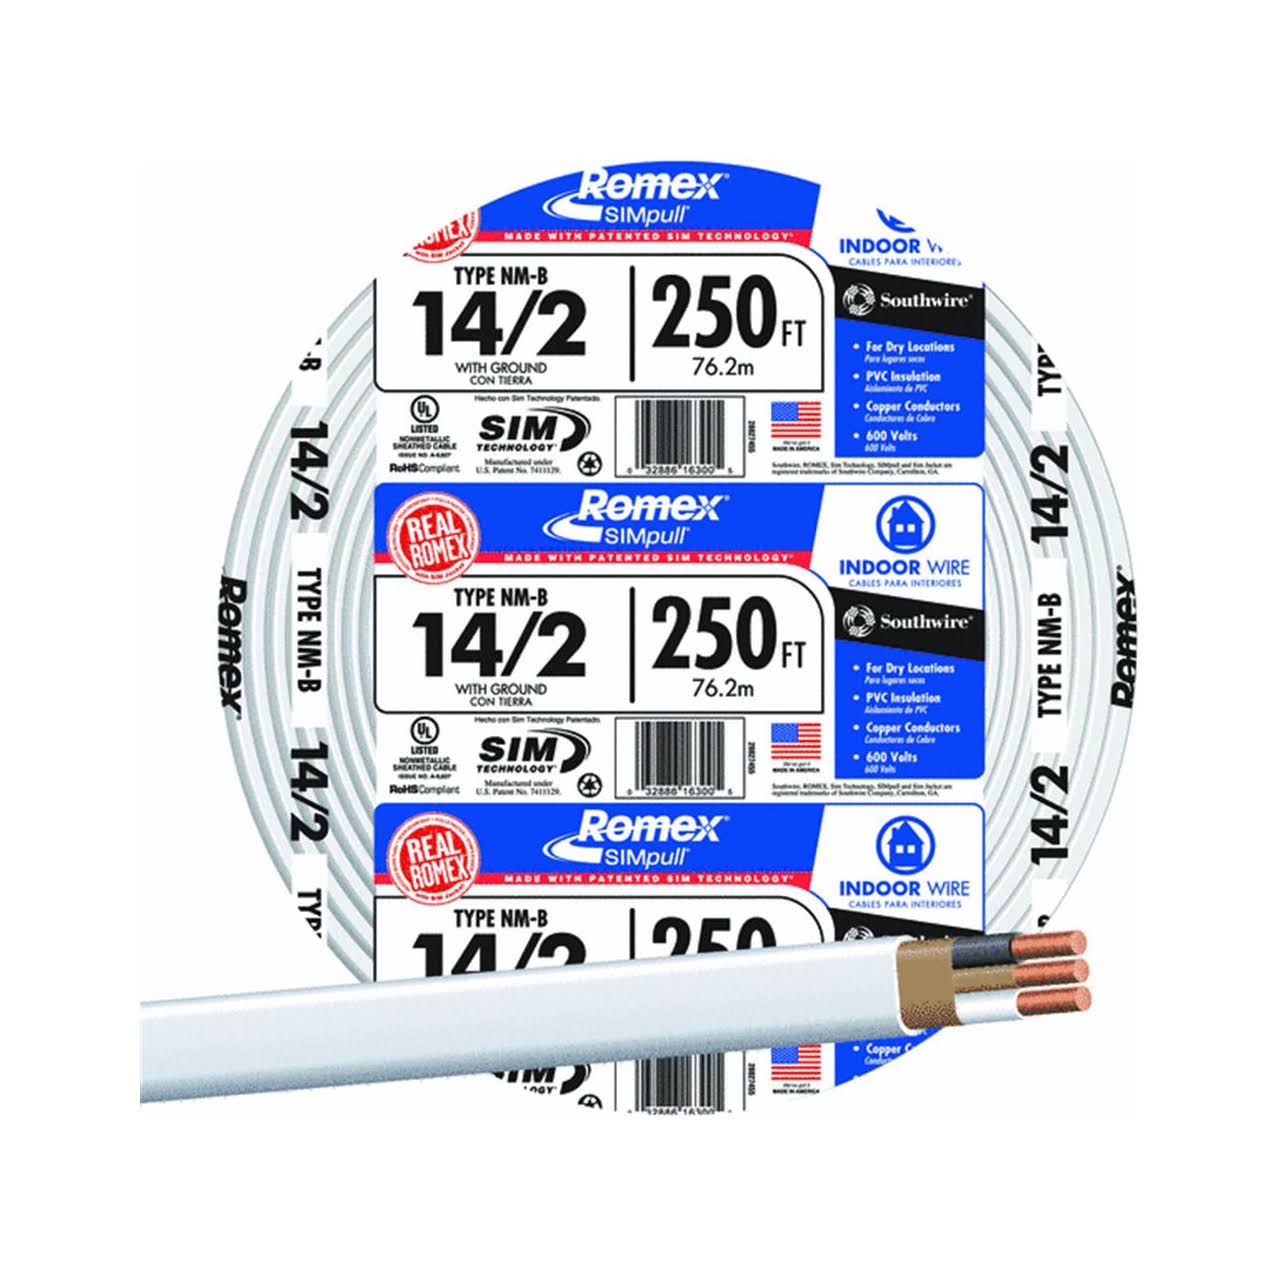 Romex 250 Ft. 14-2 Solid White NMW/G Wire 28827455